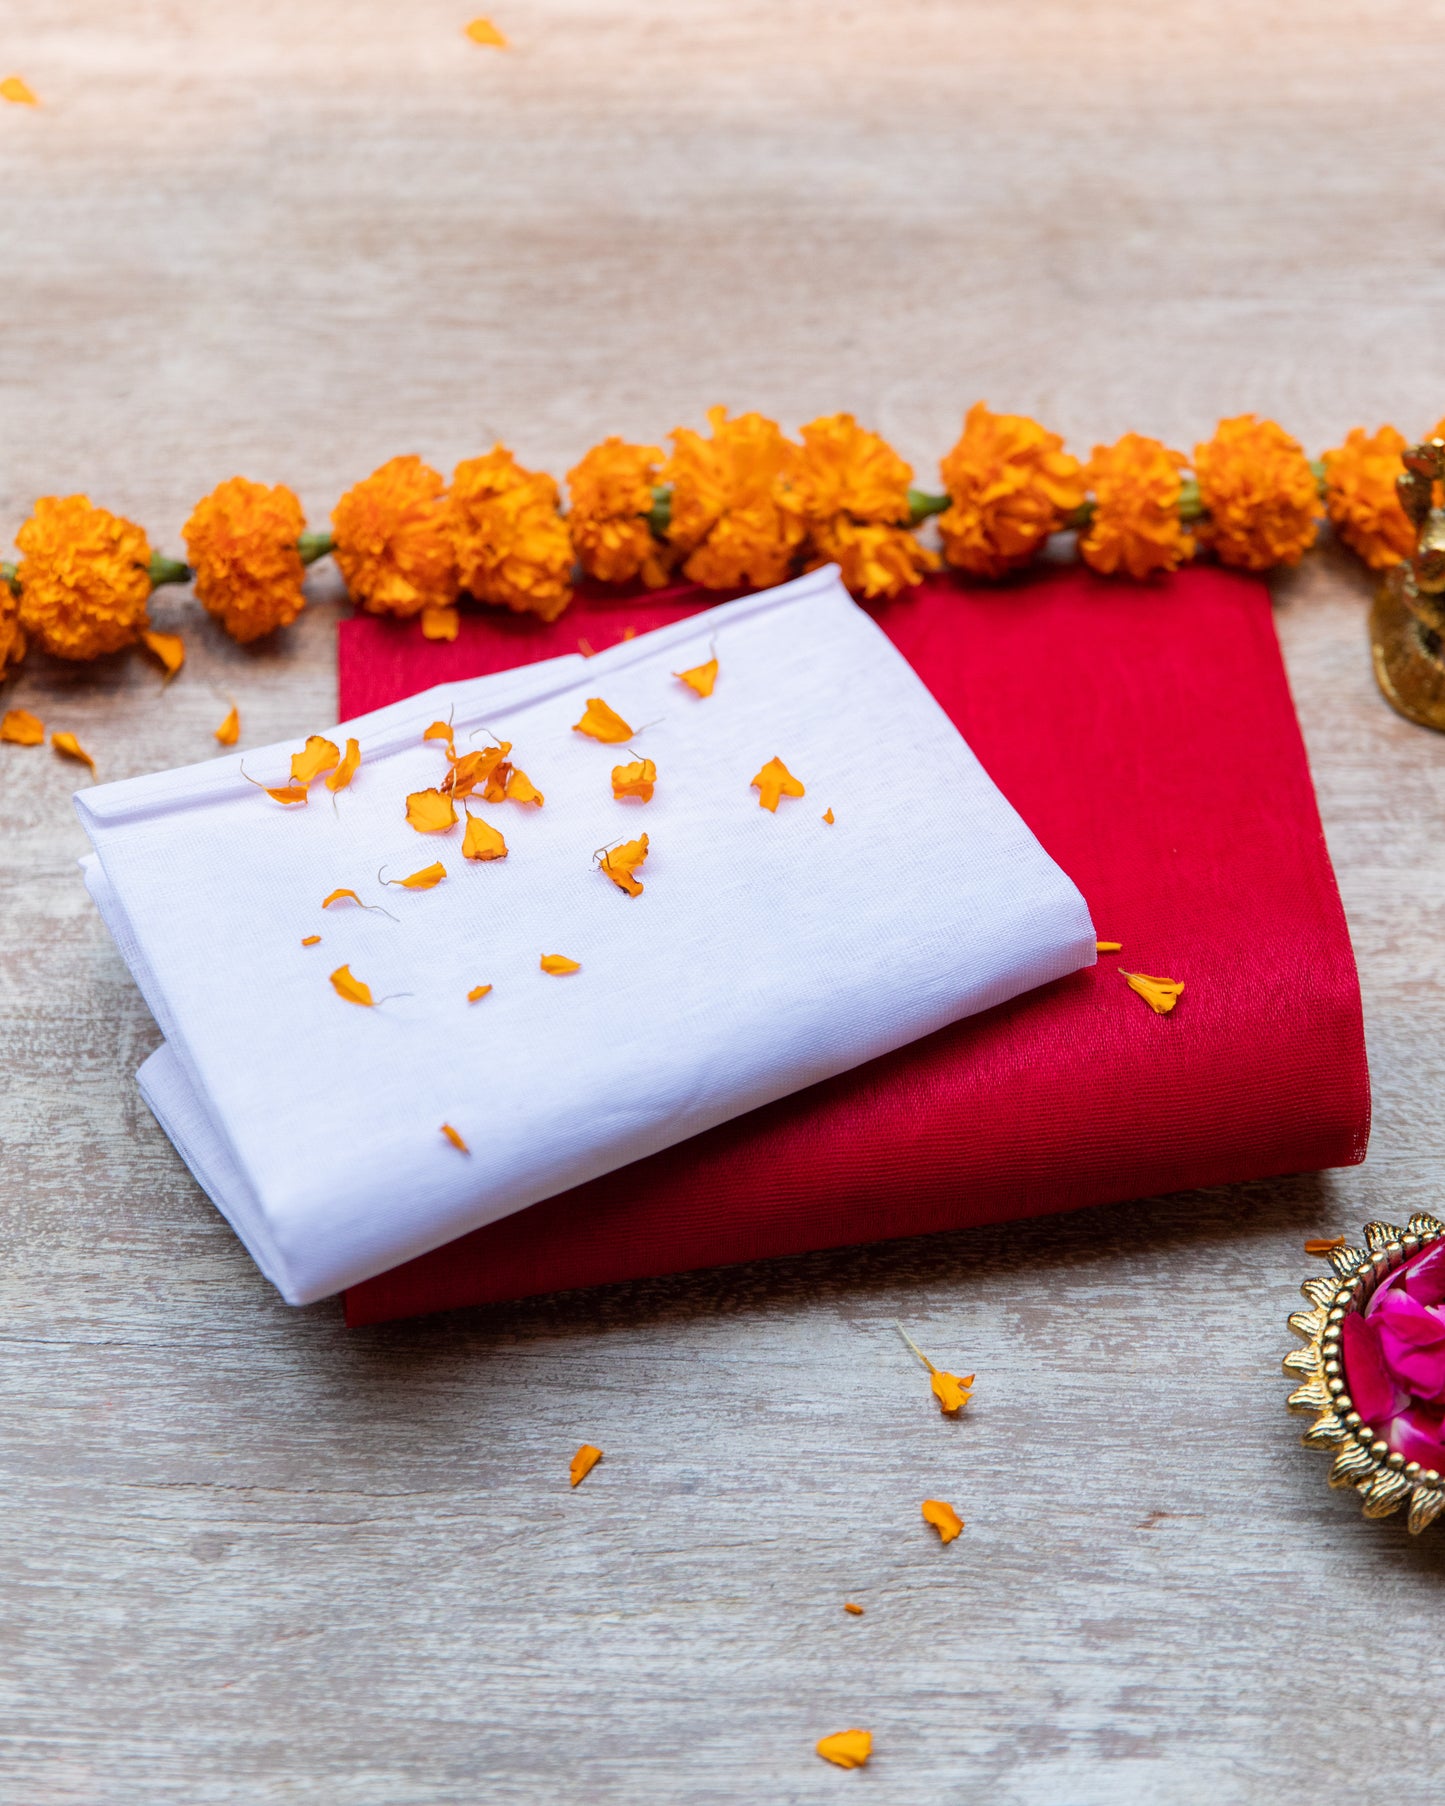 Red & White Puja Cloth To Use In Indian Puja/Havan.